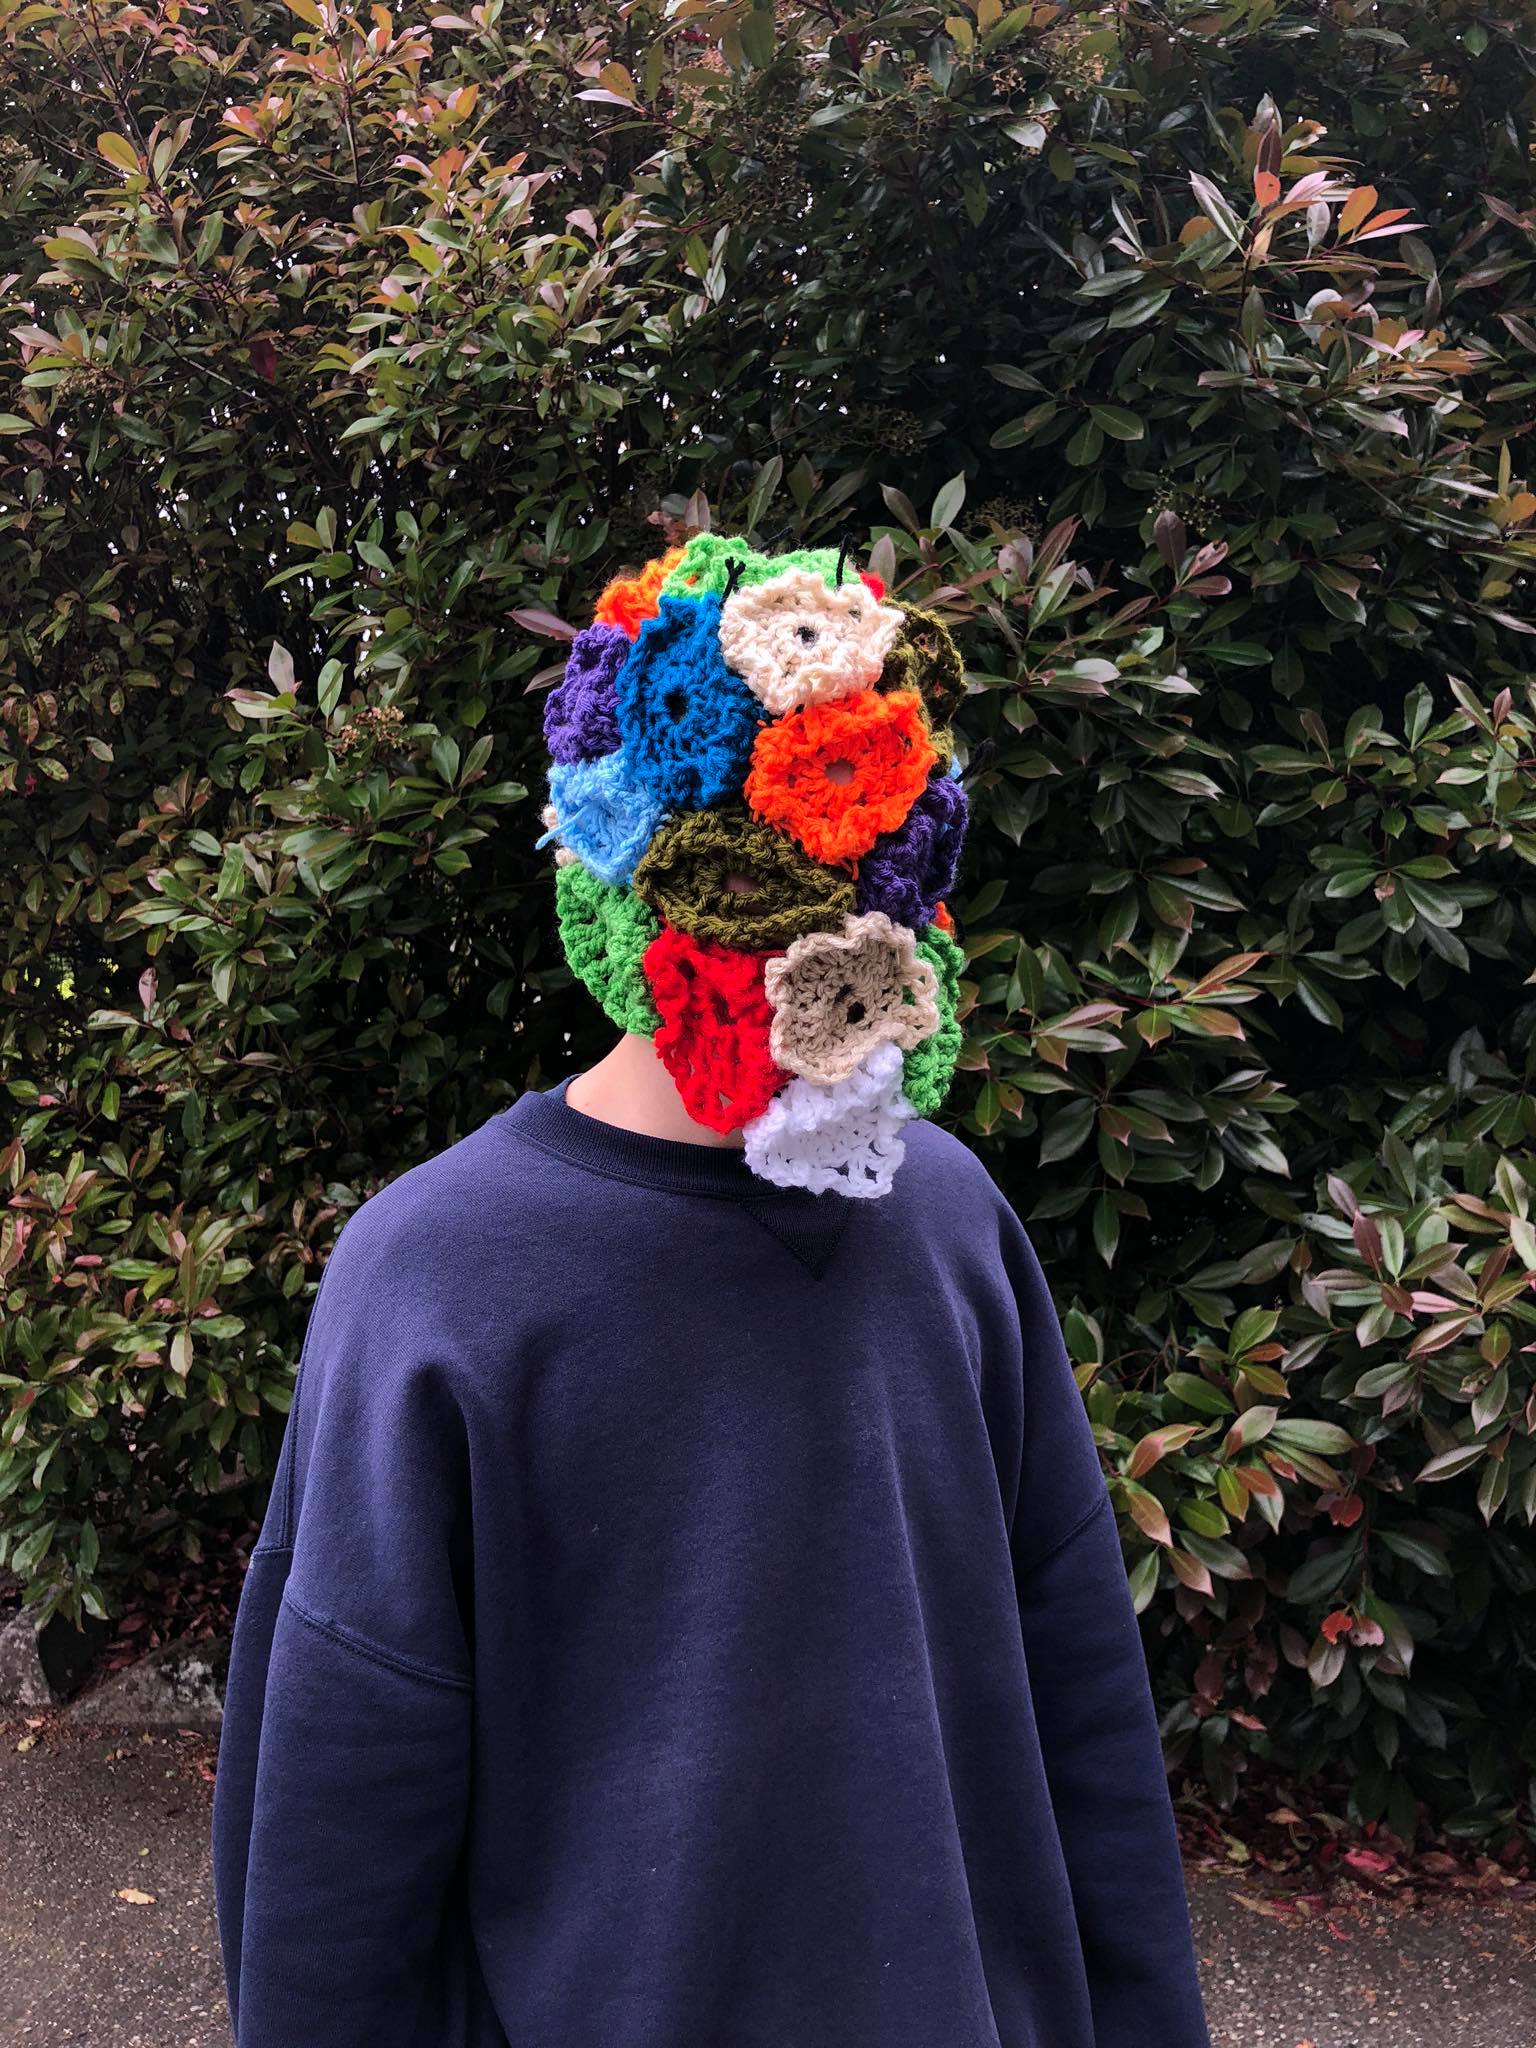 A person standing outside wearing a face-covering helmet made of knitted doilies